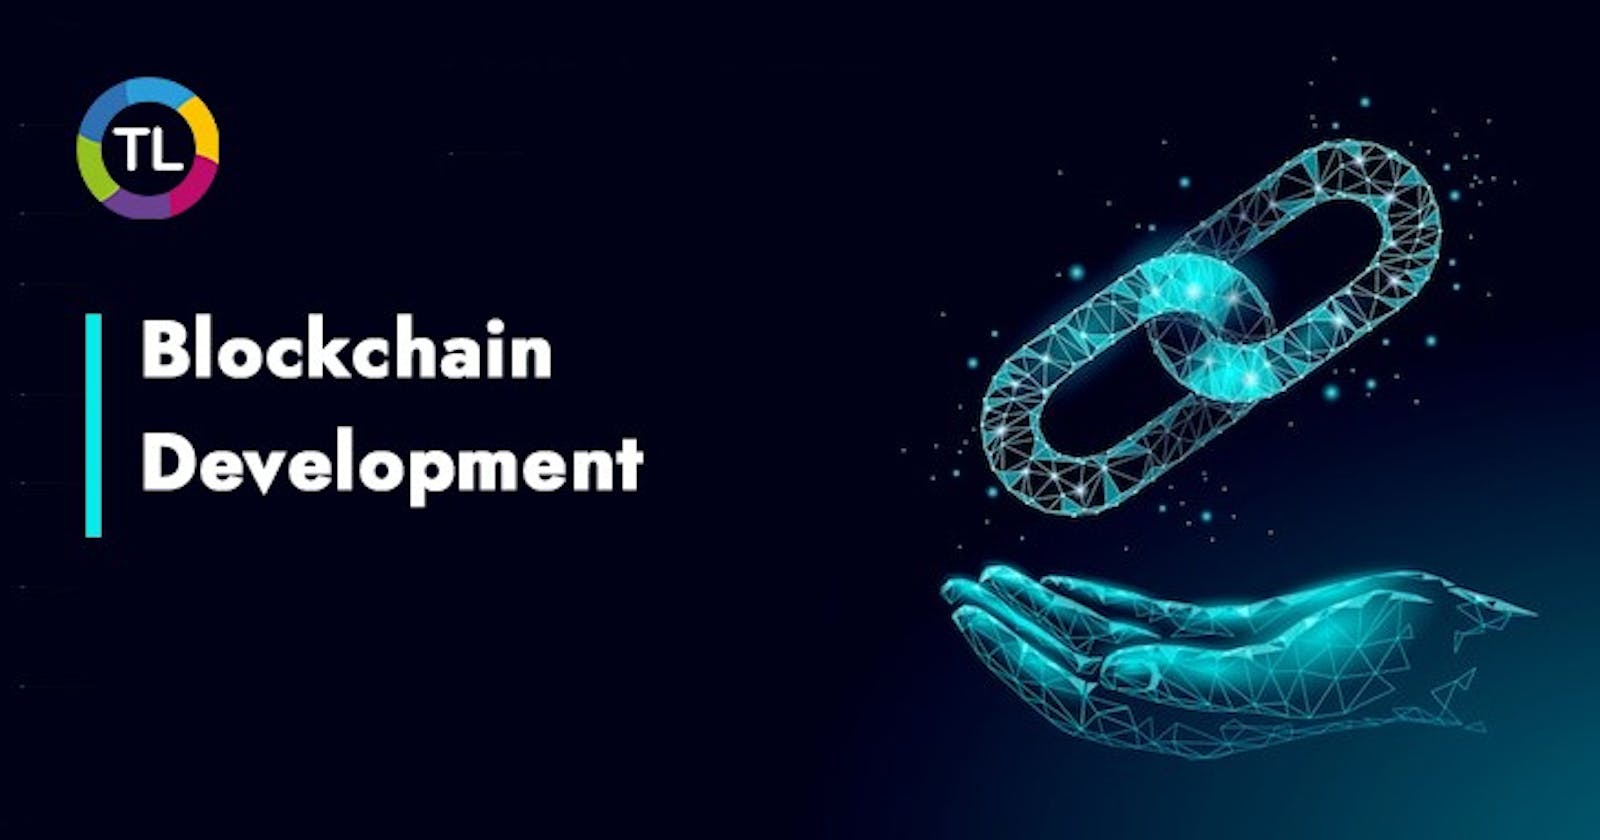 What problems can blockchain solve in general?